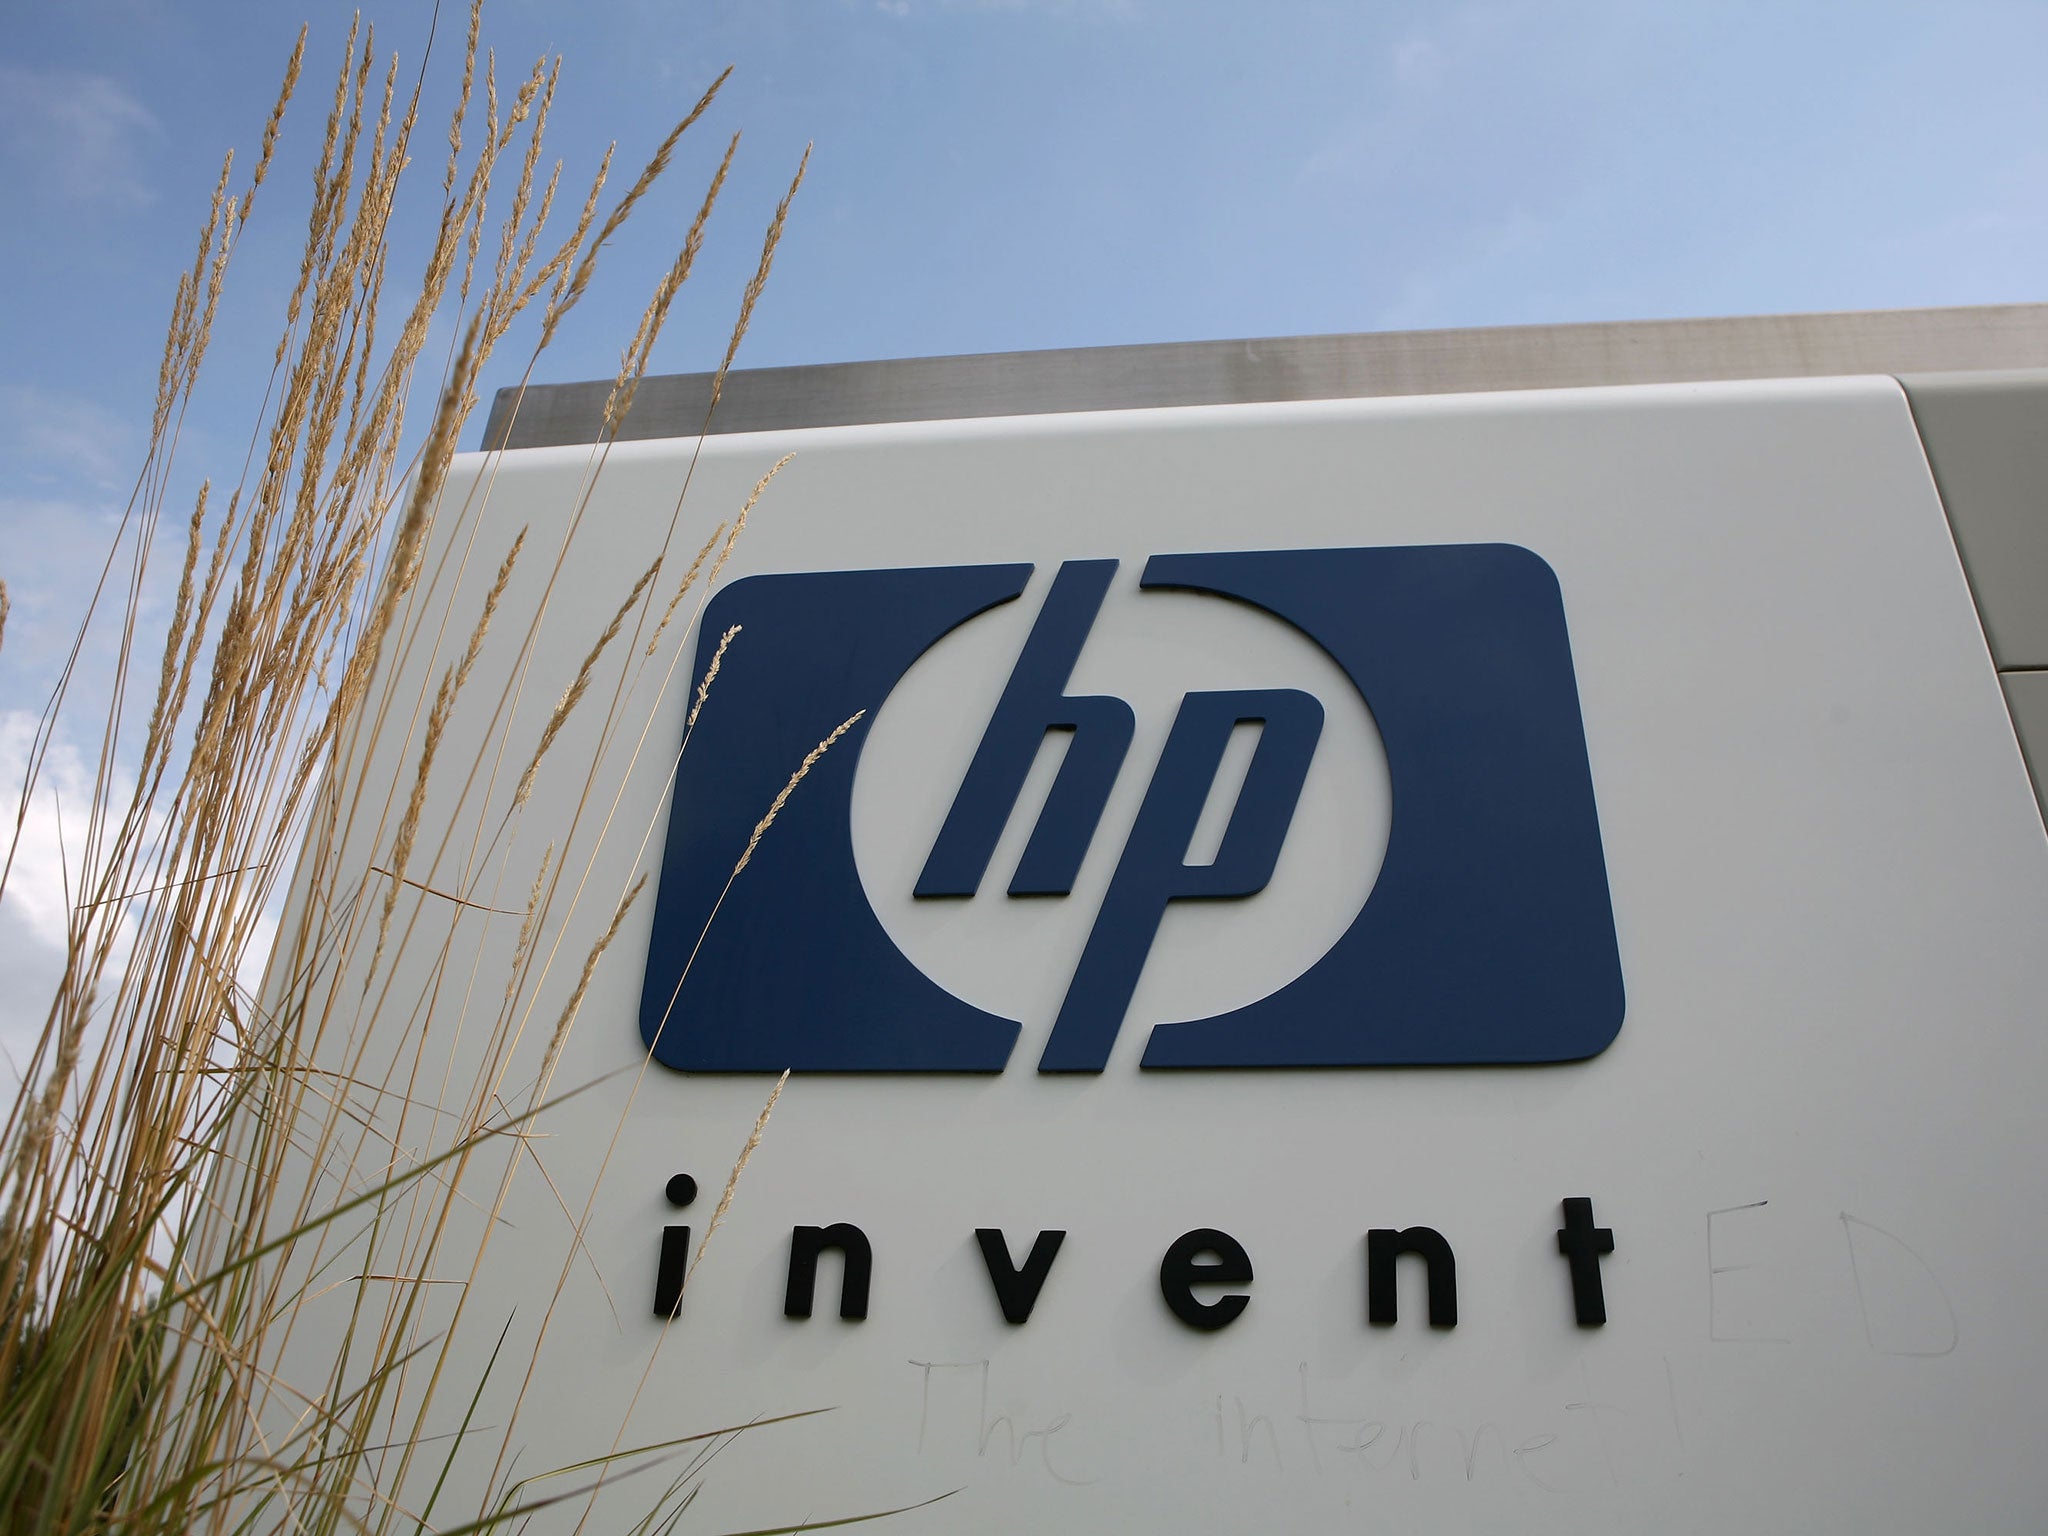 Technology company Hewlett-Packard has said it plans to cut between 25,000 and 30,000 jobs. The move is part of an effort to split the company into two units, which is set to take place in November.